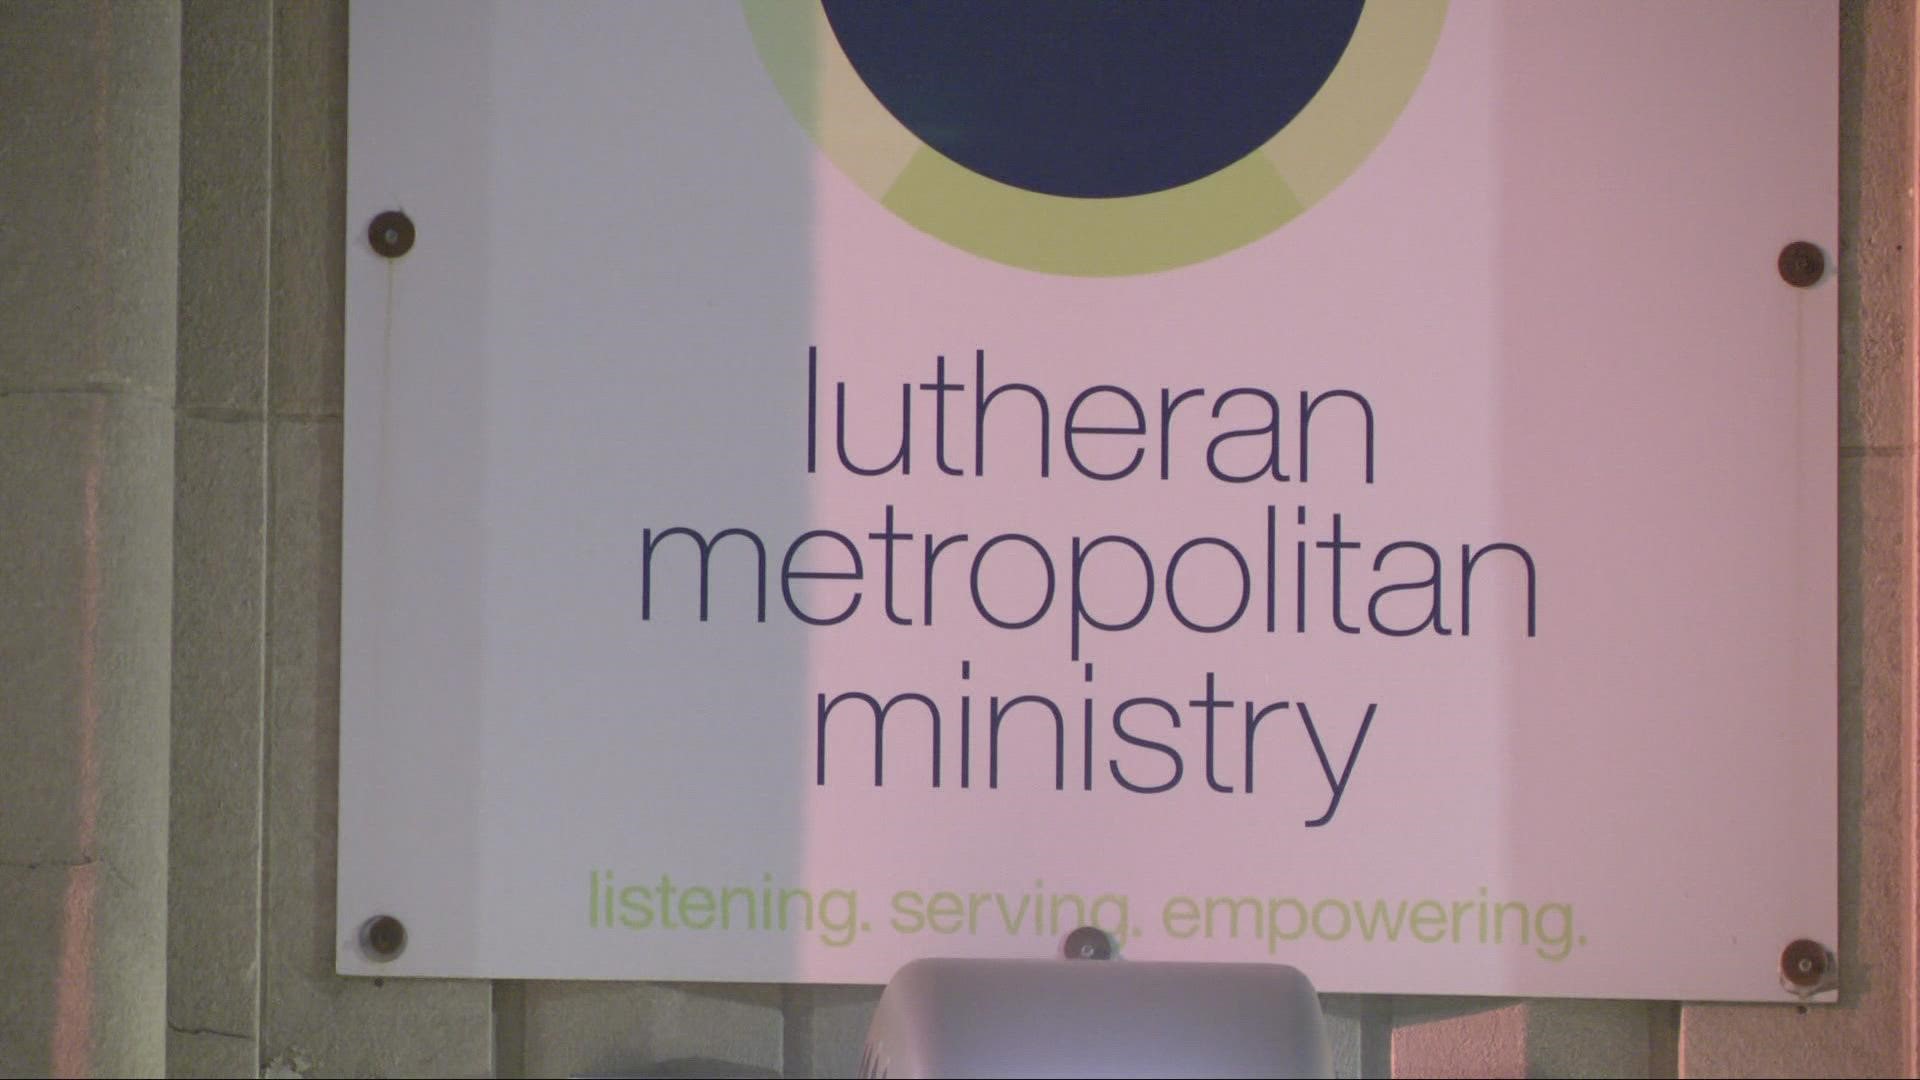 Lutheran Metropolitan Ministry Men's Shelter on Lakeside Avenue is the largest in the state of Ohio. During an arctic freeze, the facility will be open for 24 hours.